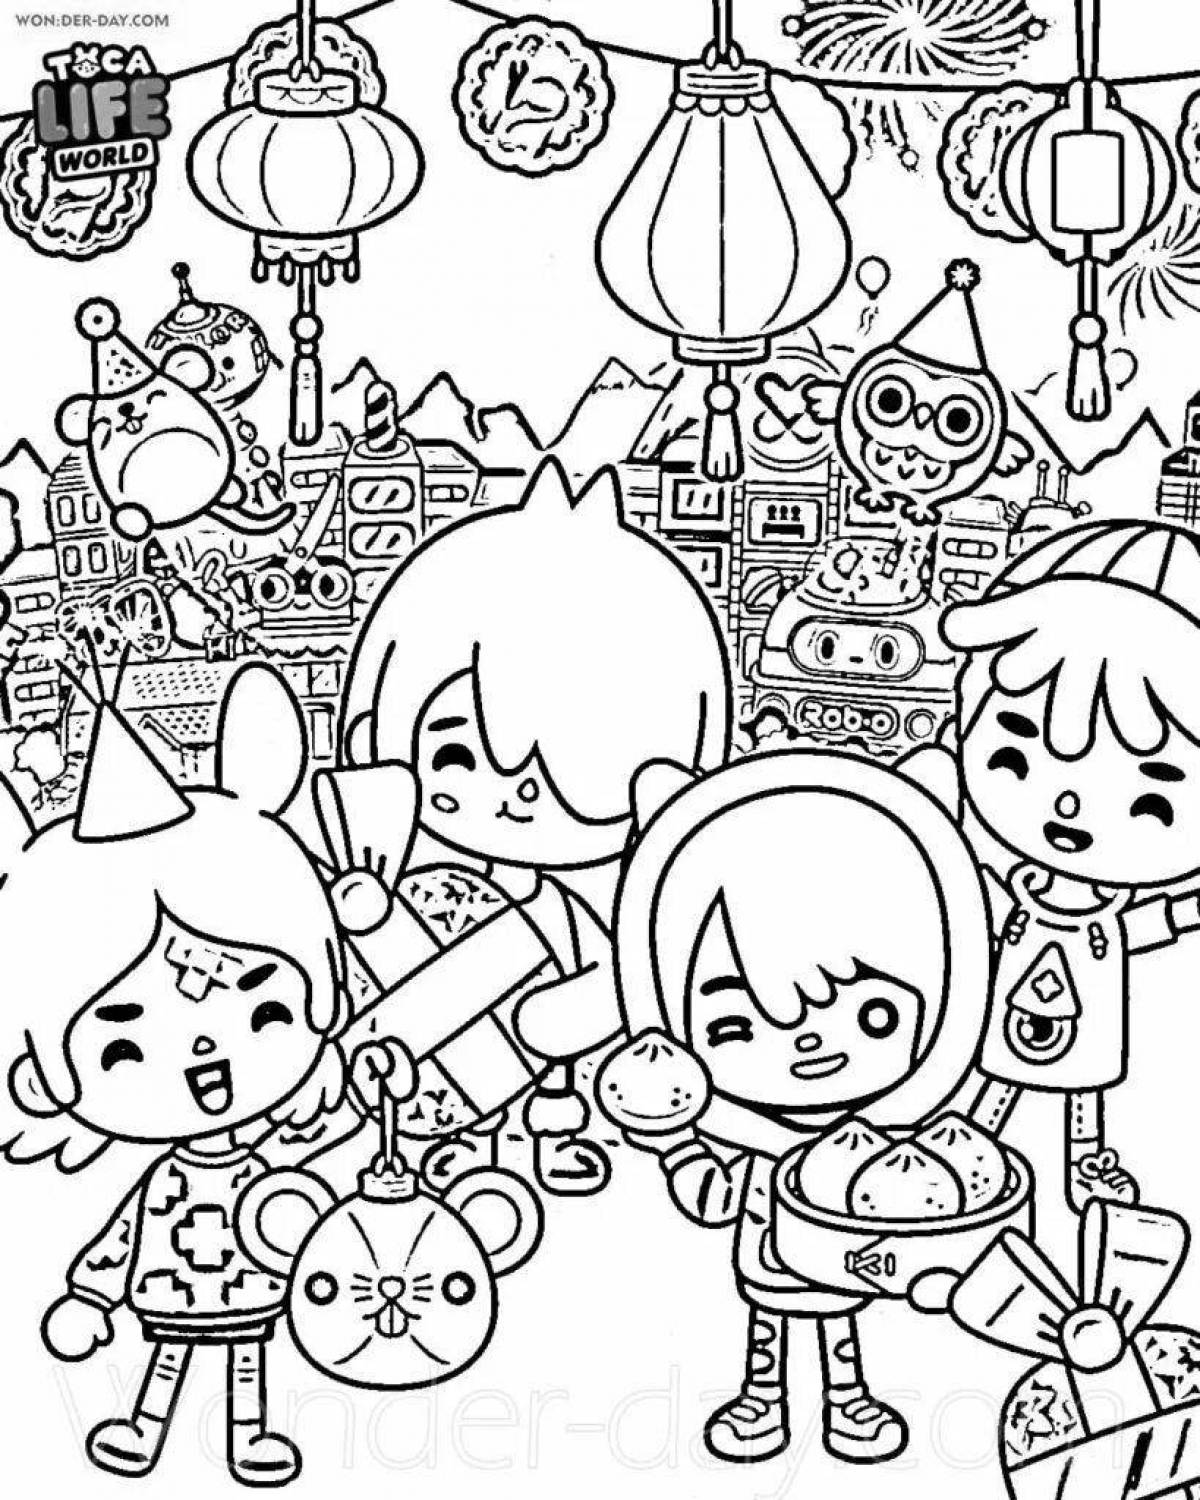 Toca life world amazing coloring page